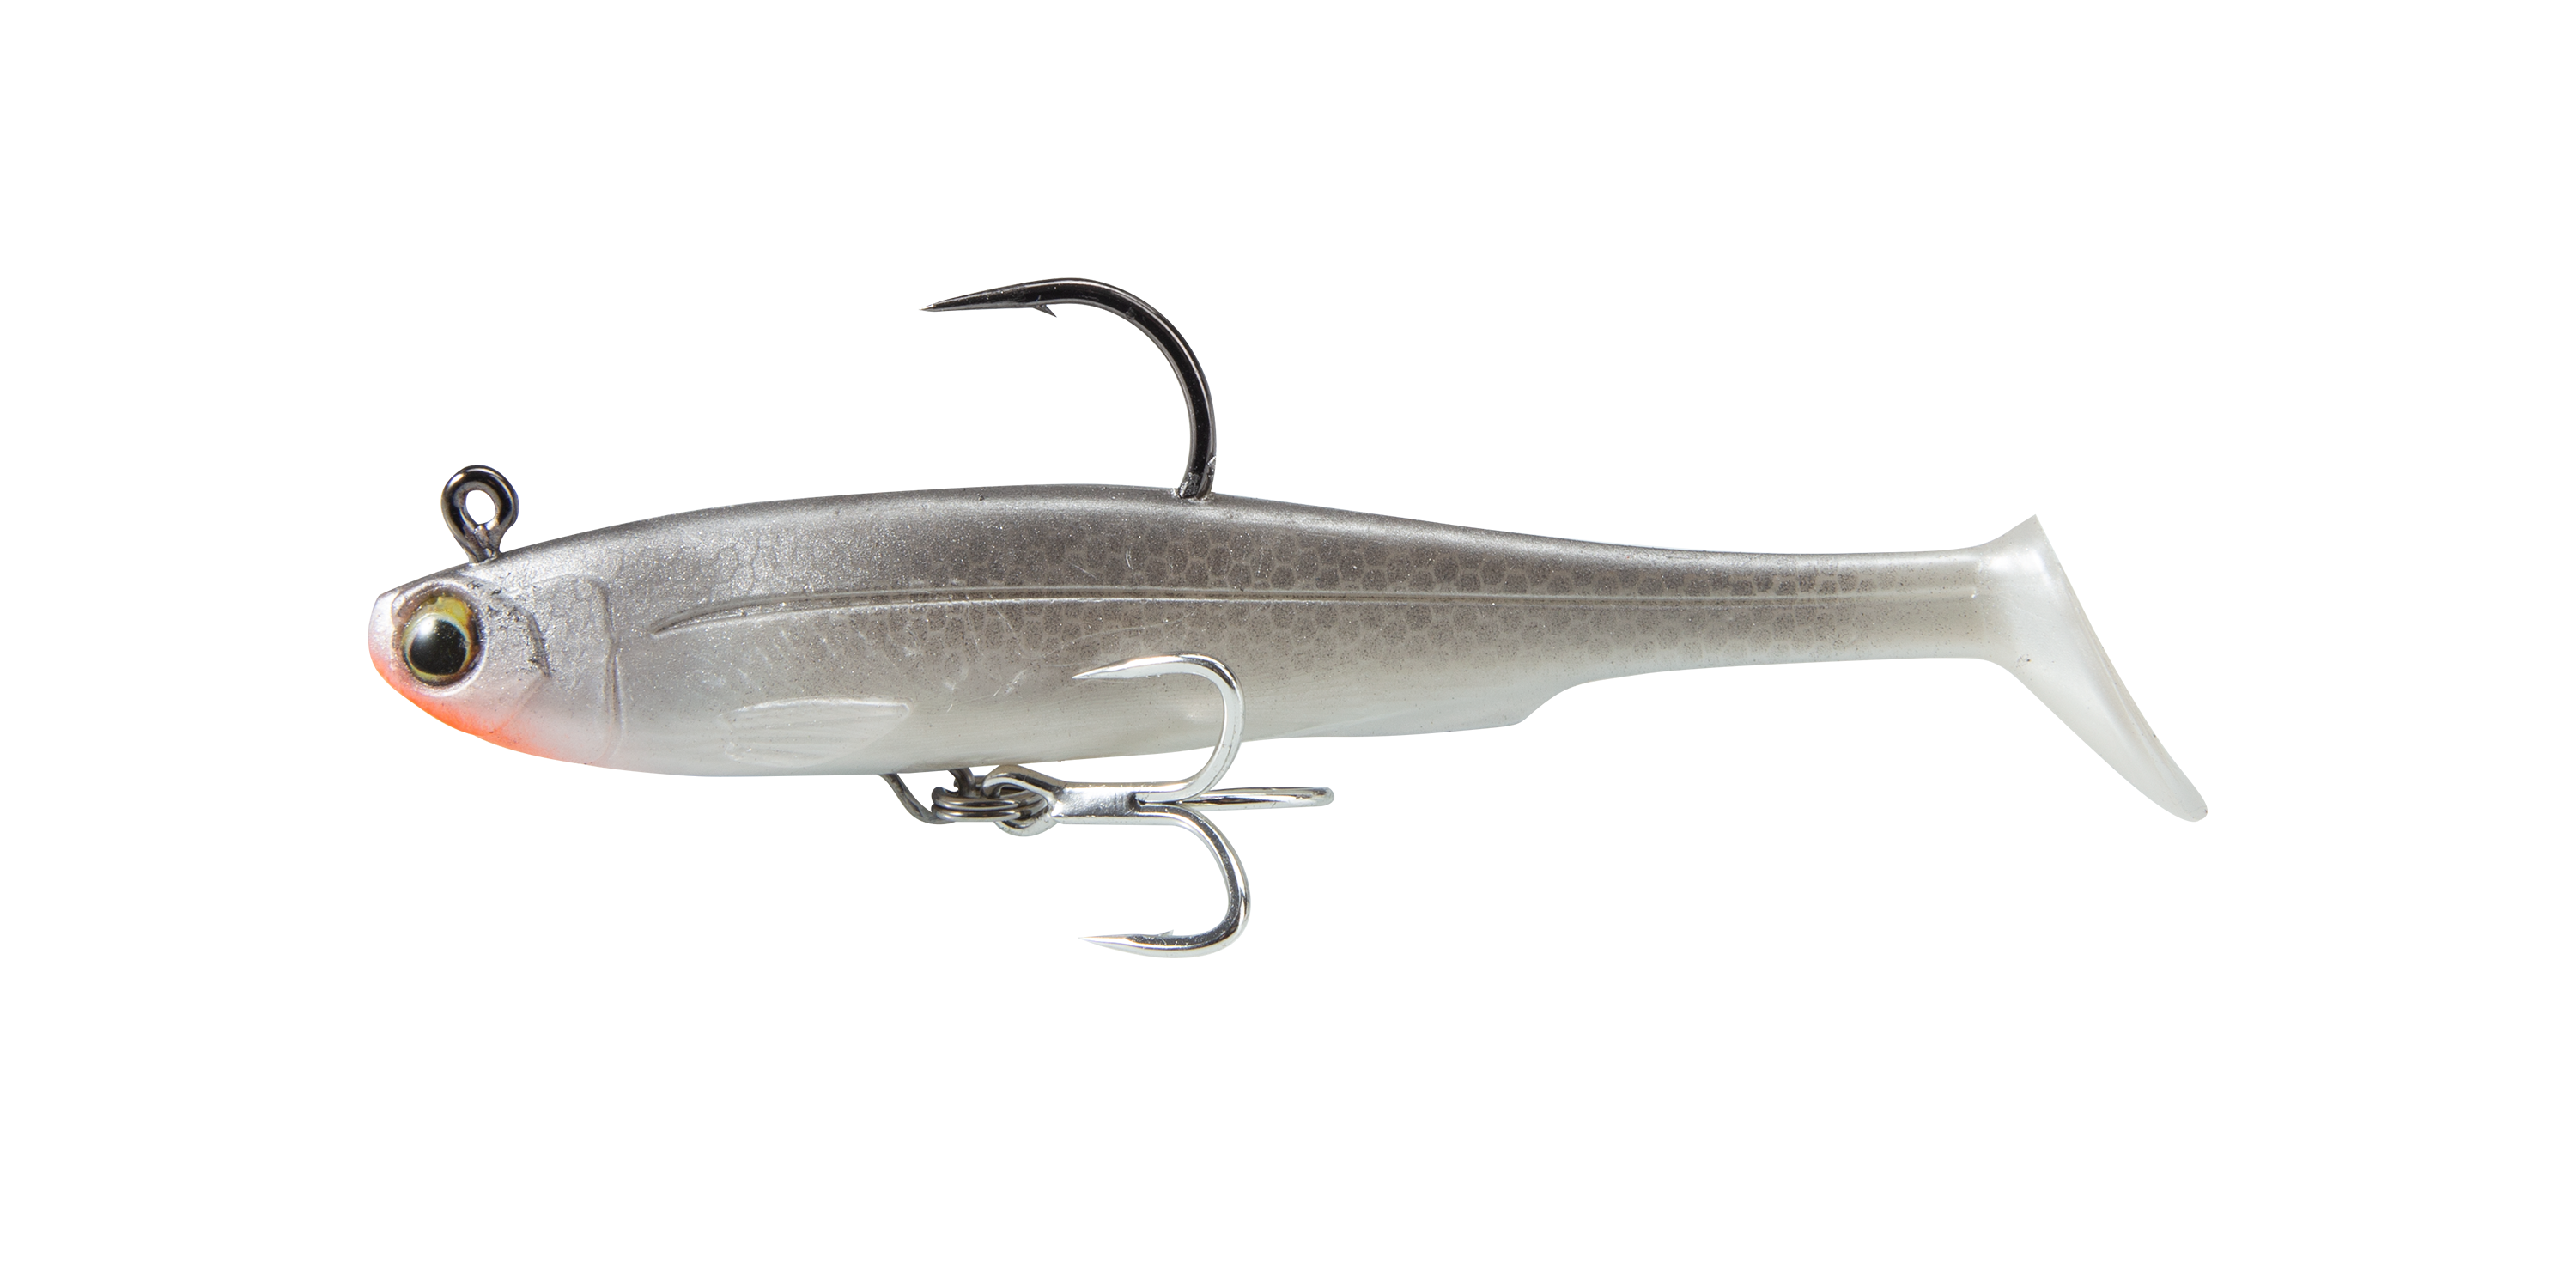 The Irukandji tackle DTF lures are selling fast, huge range of